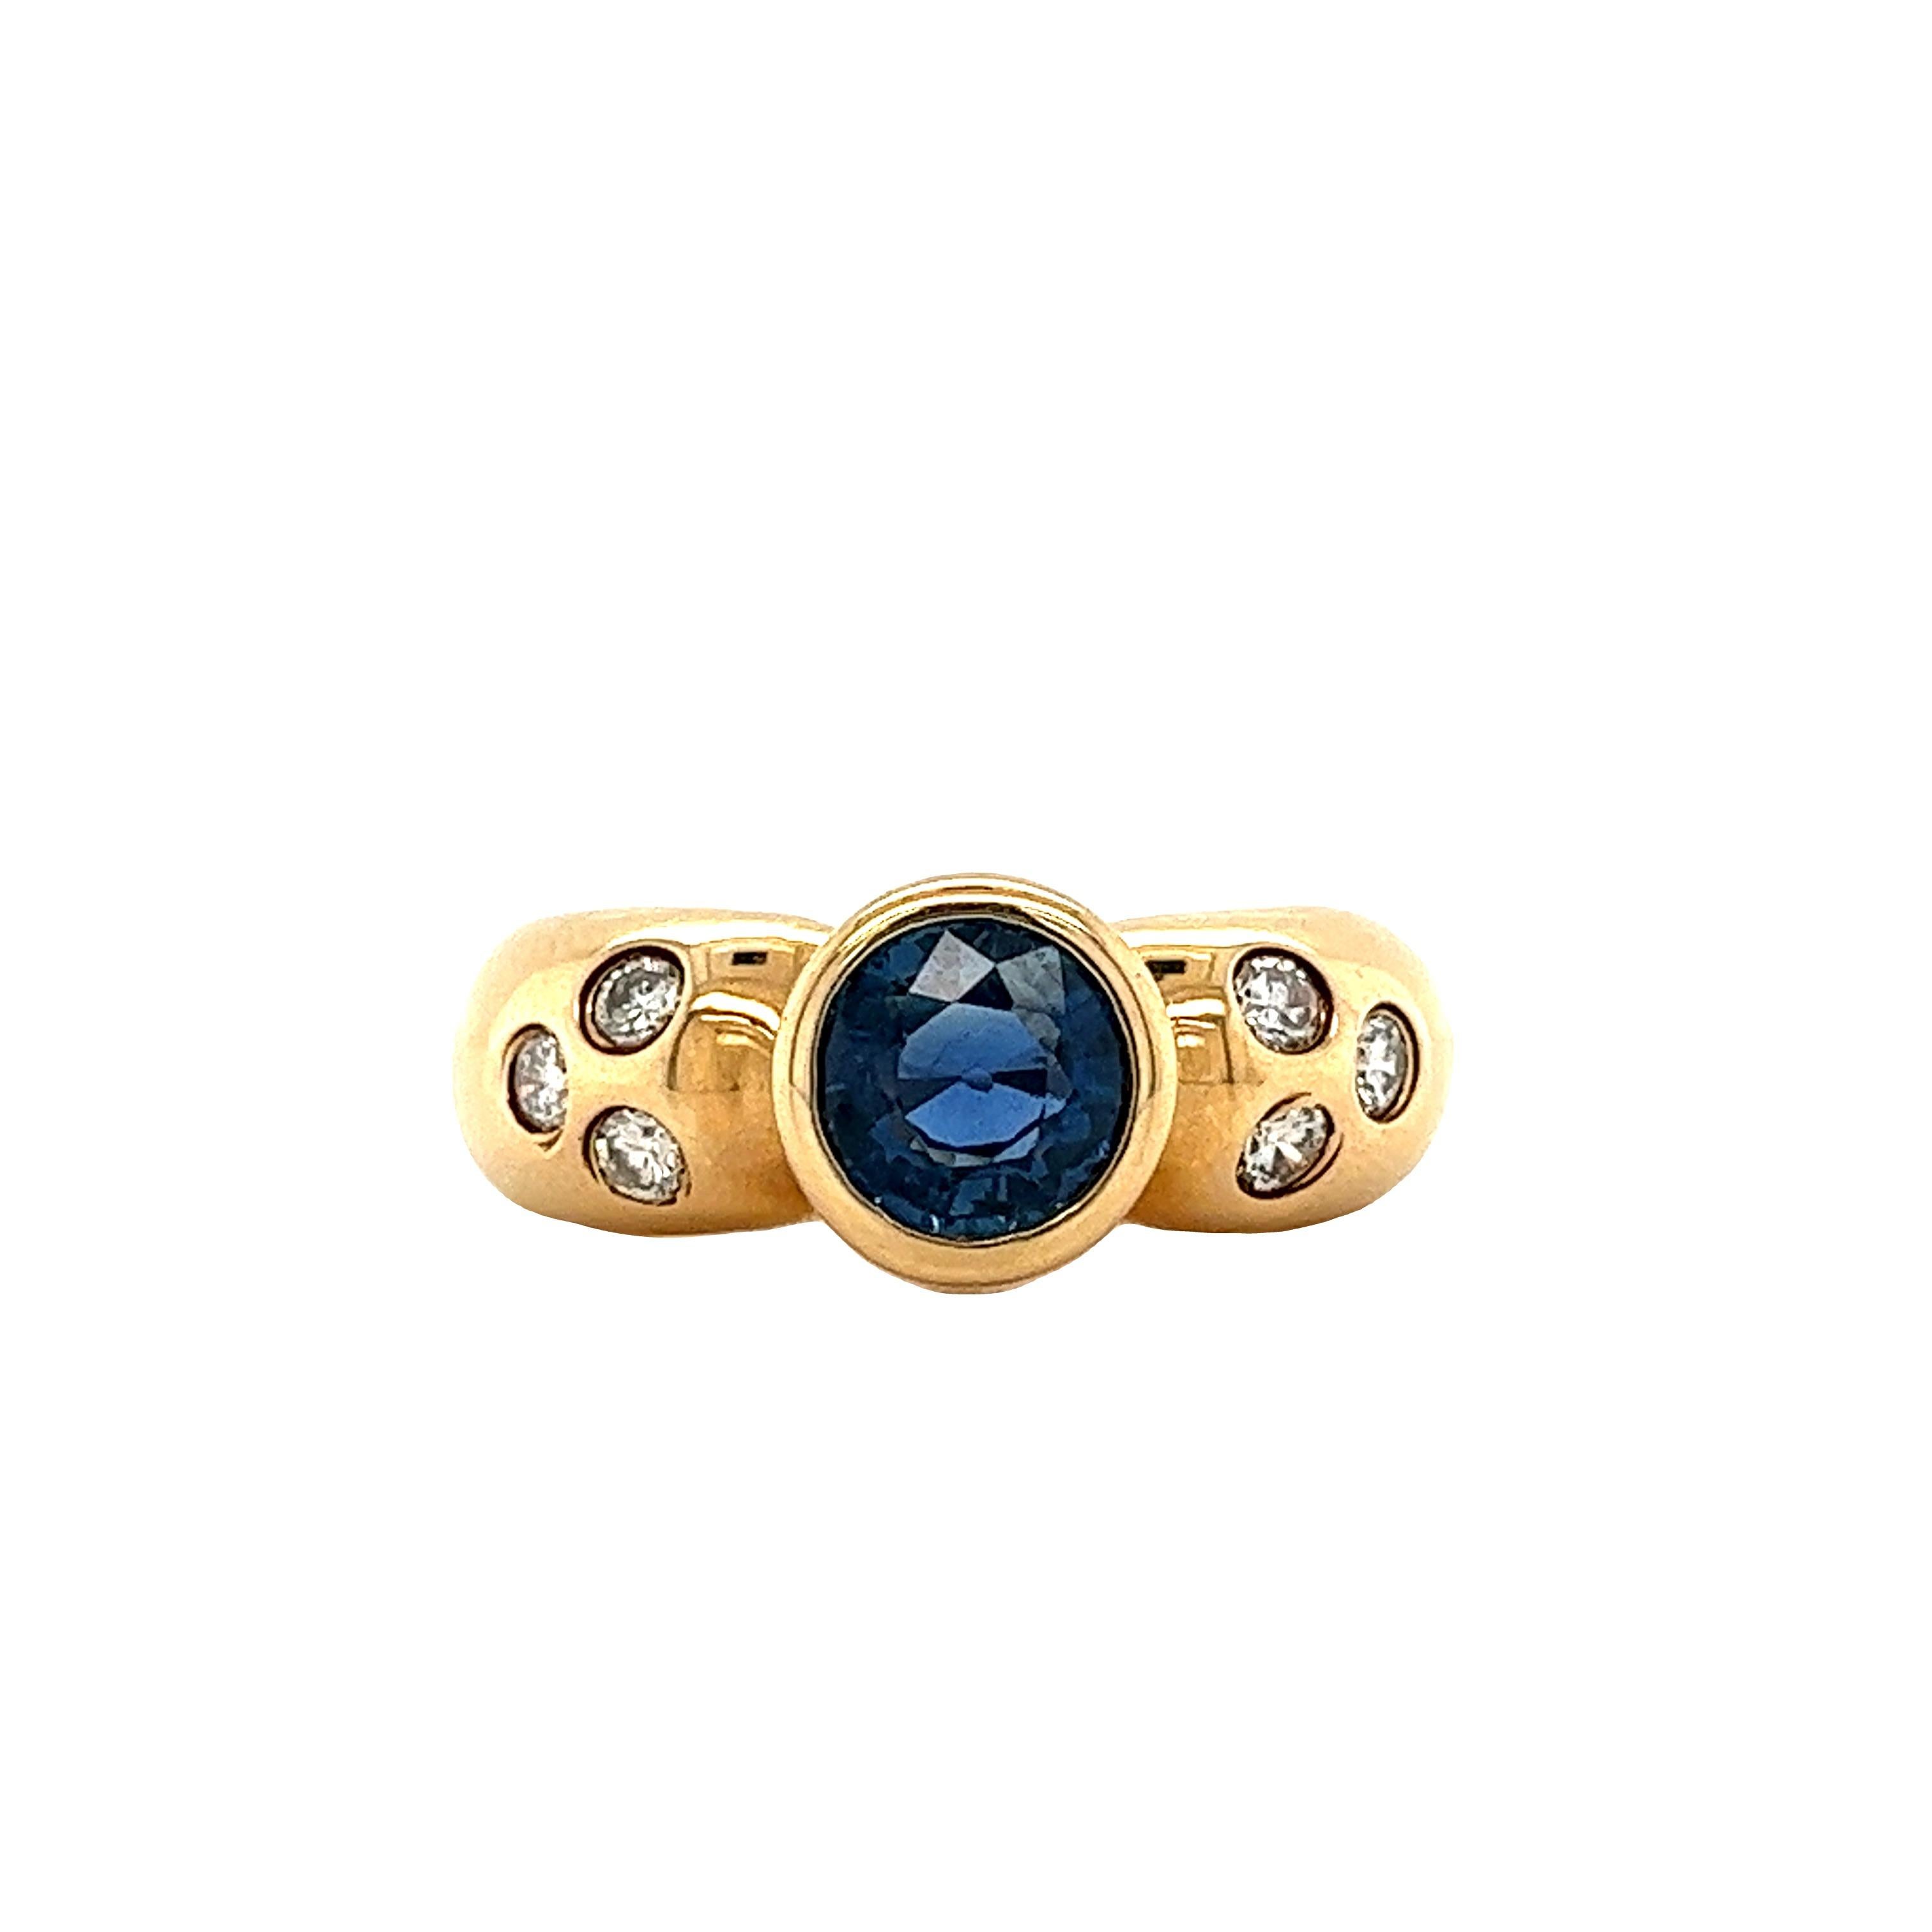 1.08 carat natural round-cut Blue Sapphire set with 0.12 carats in round-cut natural diamonds. The Blue Sapphire is mounted in an 14k yellow gold bezel setting with bezel set diamonds. The bezel setting provides excellent color contrast to the